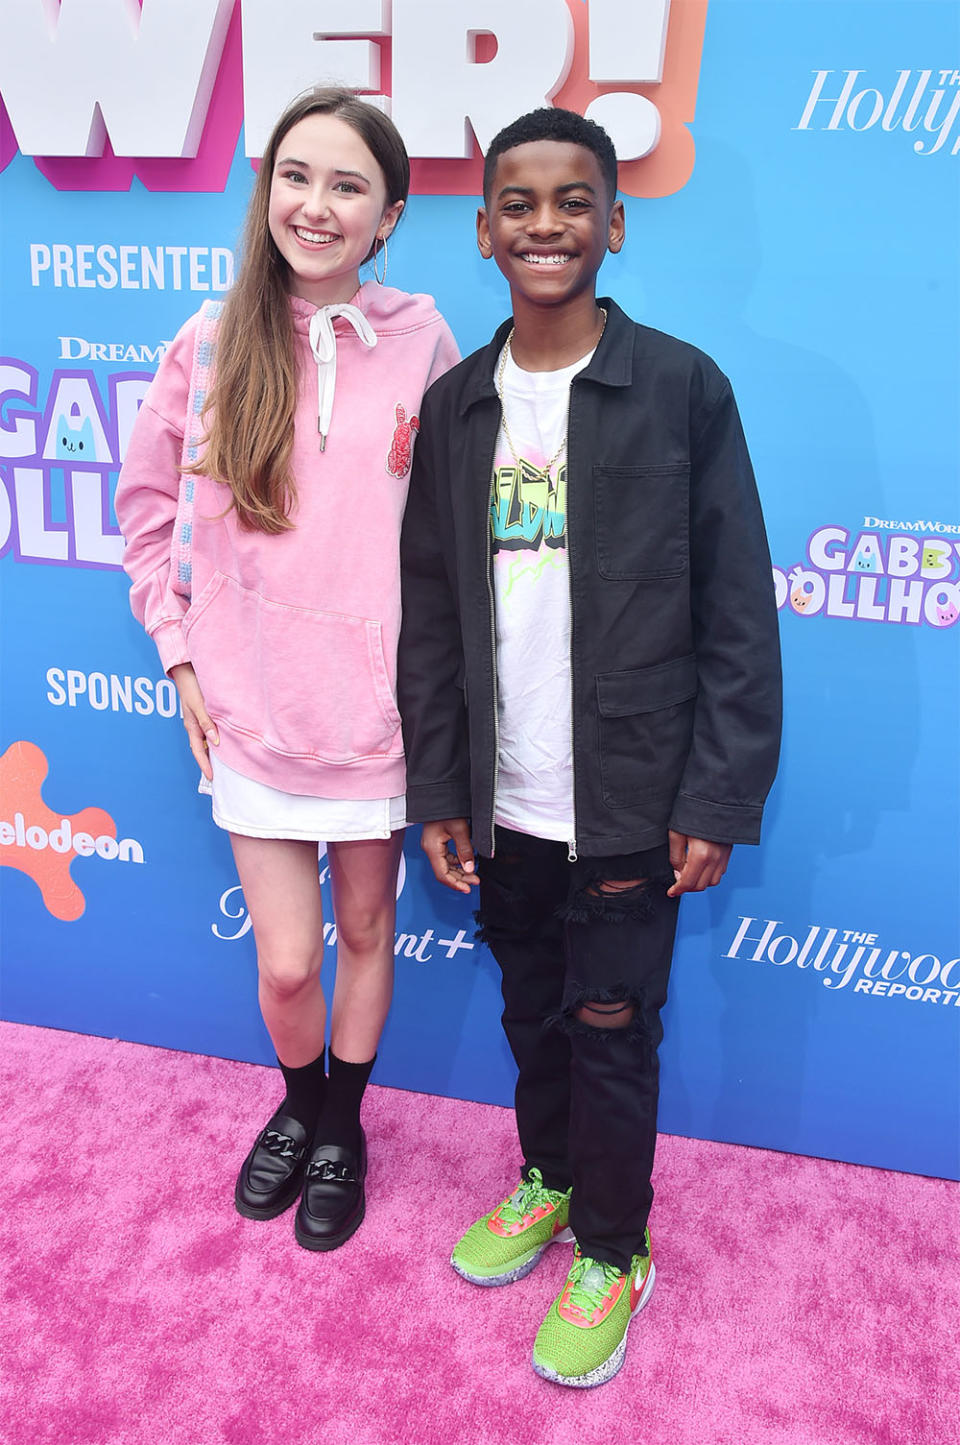 Kensington Tallman and Peyton R. Perrine III attend The Hollywood Reporter Kids! Power Celebration on June 10, 2023 at Westfield Century City in Los Angeles, California.